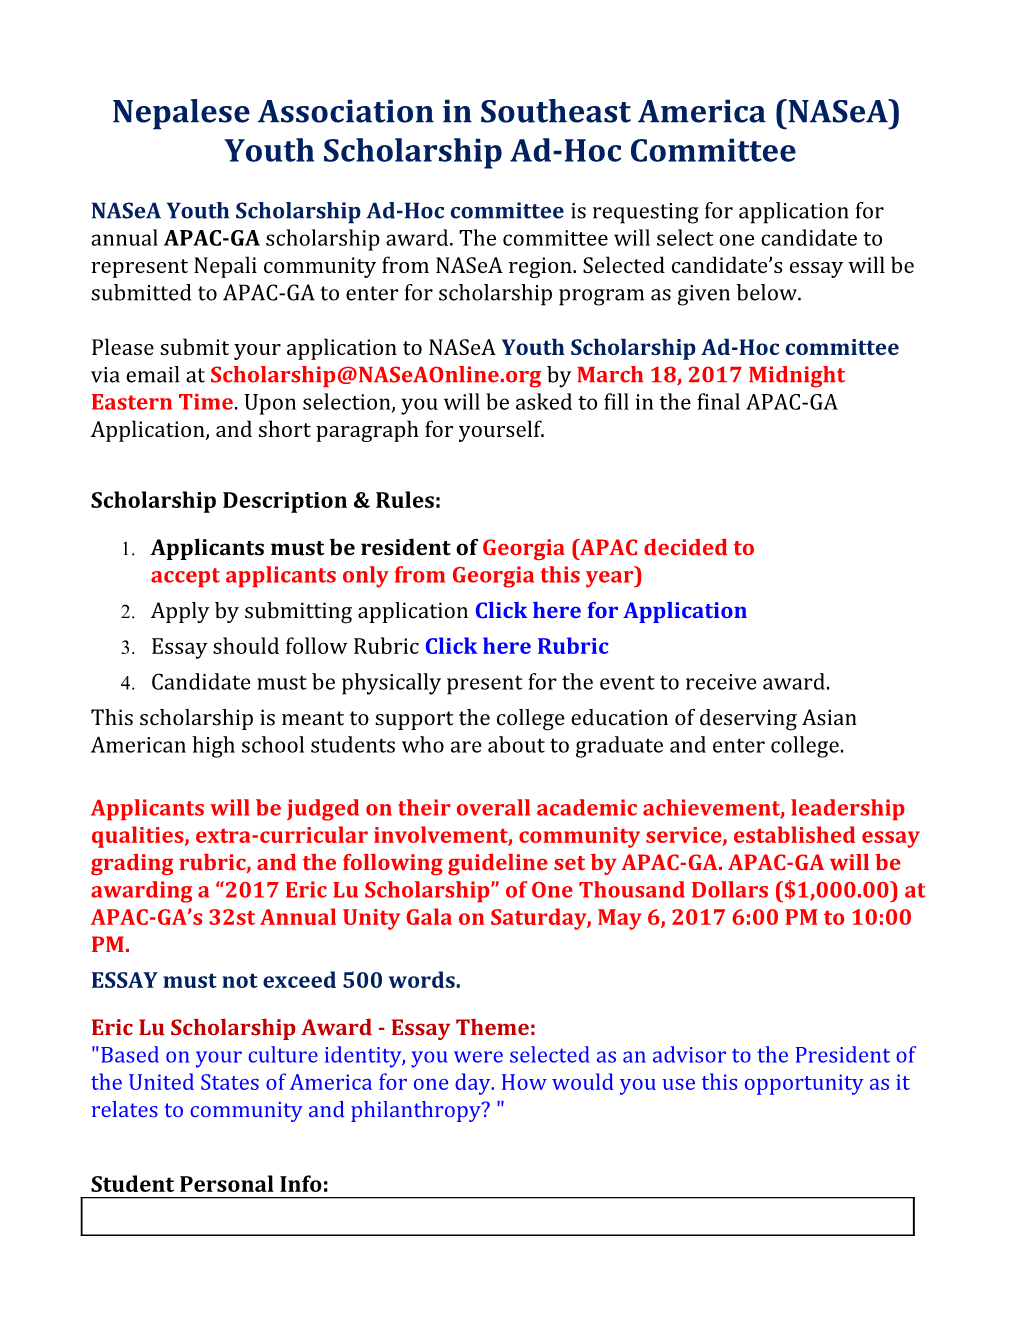 Nepalese Association in Southeast America (Nasea) Youth Scholarship Ad-Hoc Committee